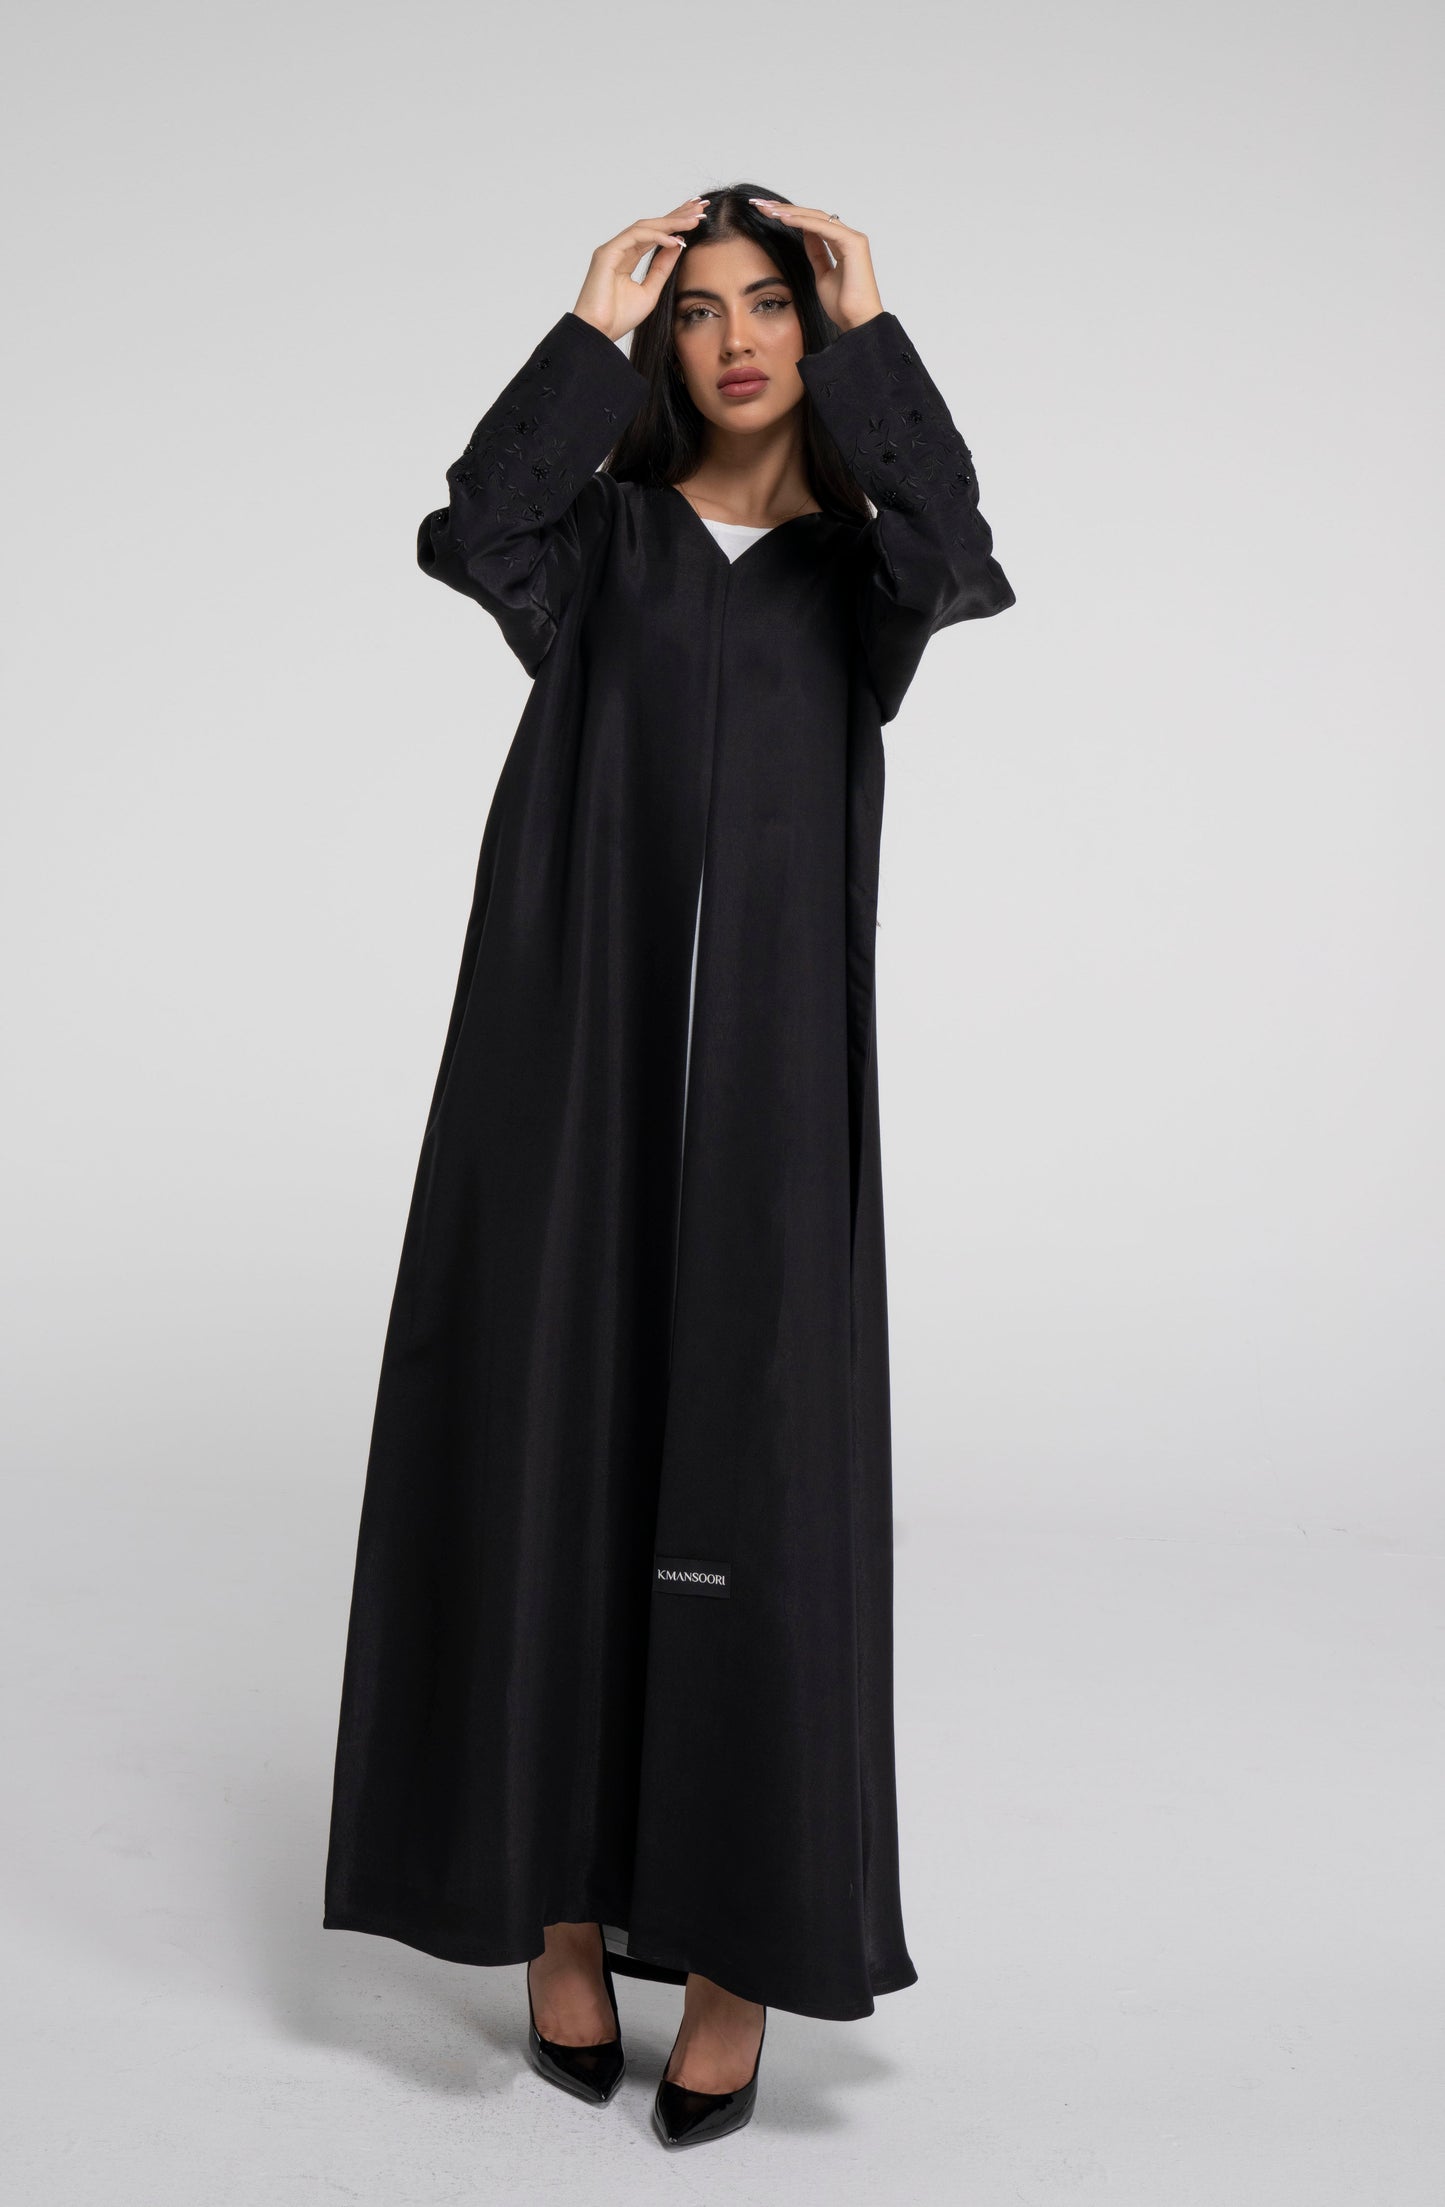 Floral embroidered sleeve with bead embellishments on black abaya